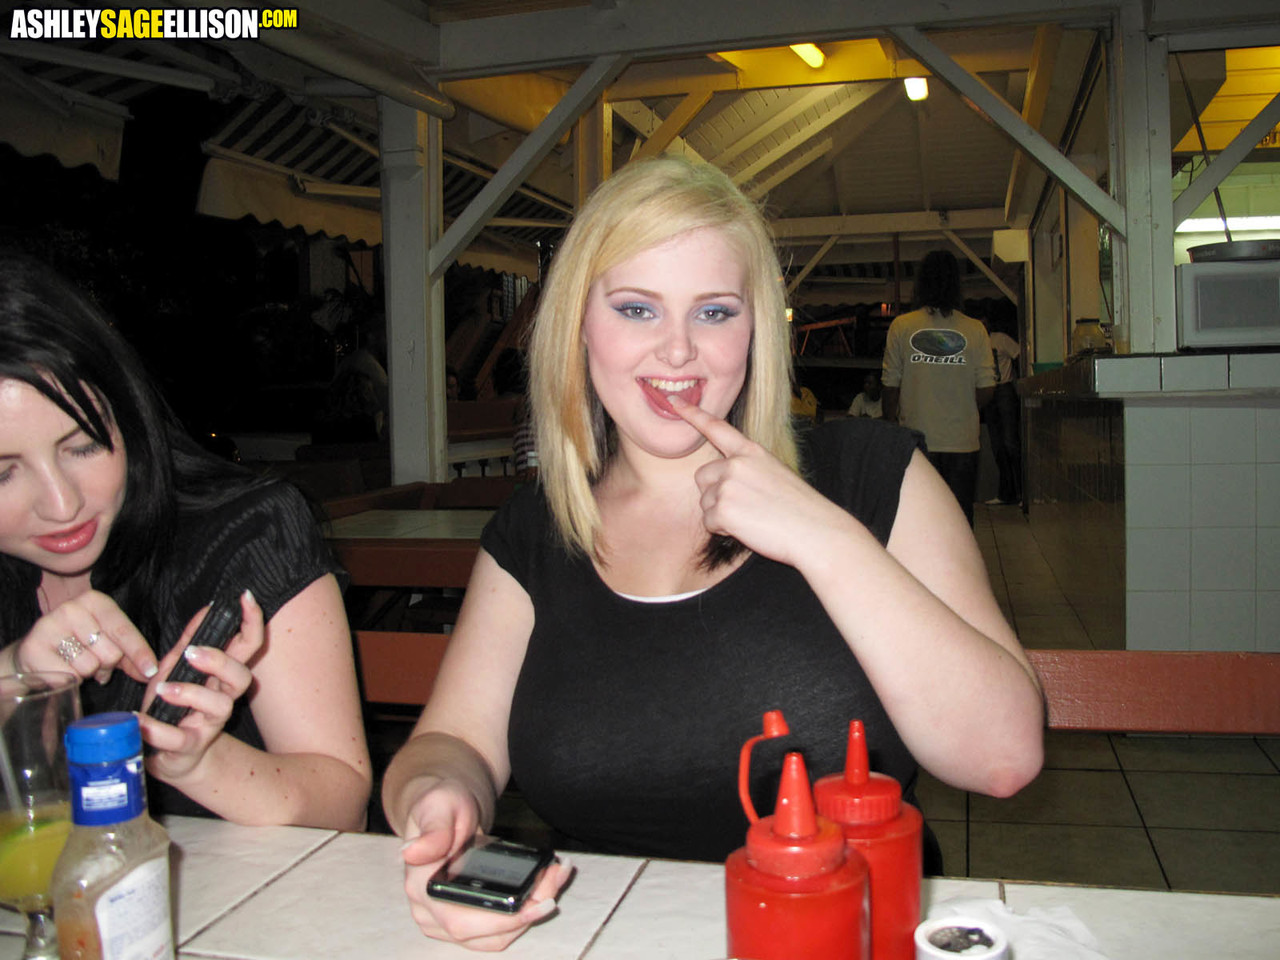 Fat chick Ashley Sage Ellison and her busty gf go out on the town ポルノ写真 #426376435 | Ashley Sage Ellison Pics, Ashley Sage Ellison, Karina Hart, BBW, モバイルポルノ